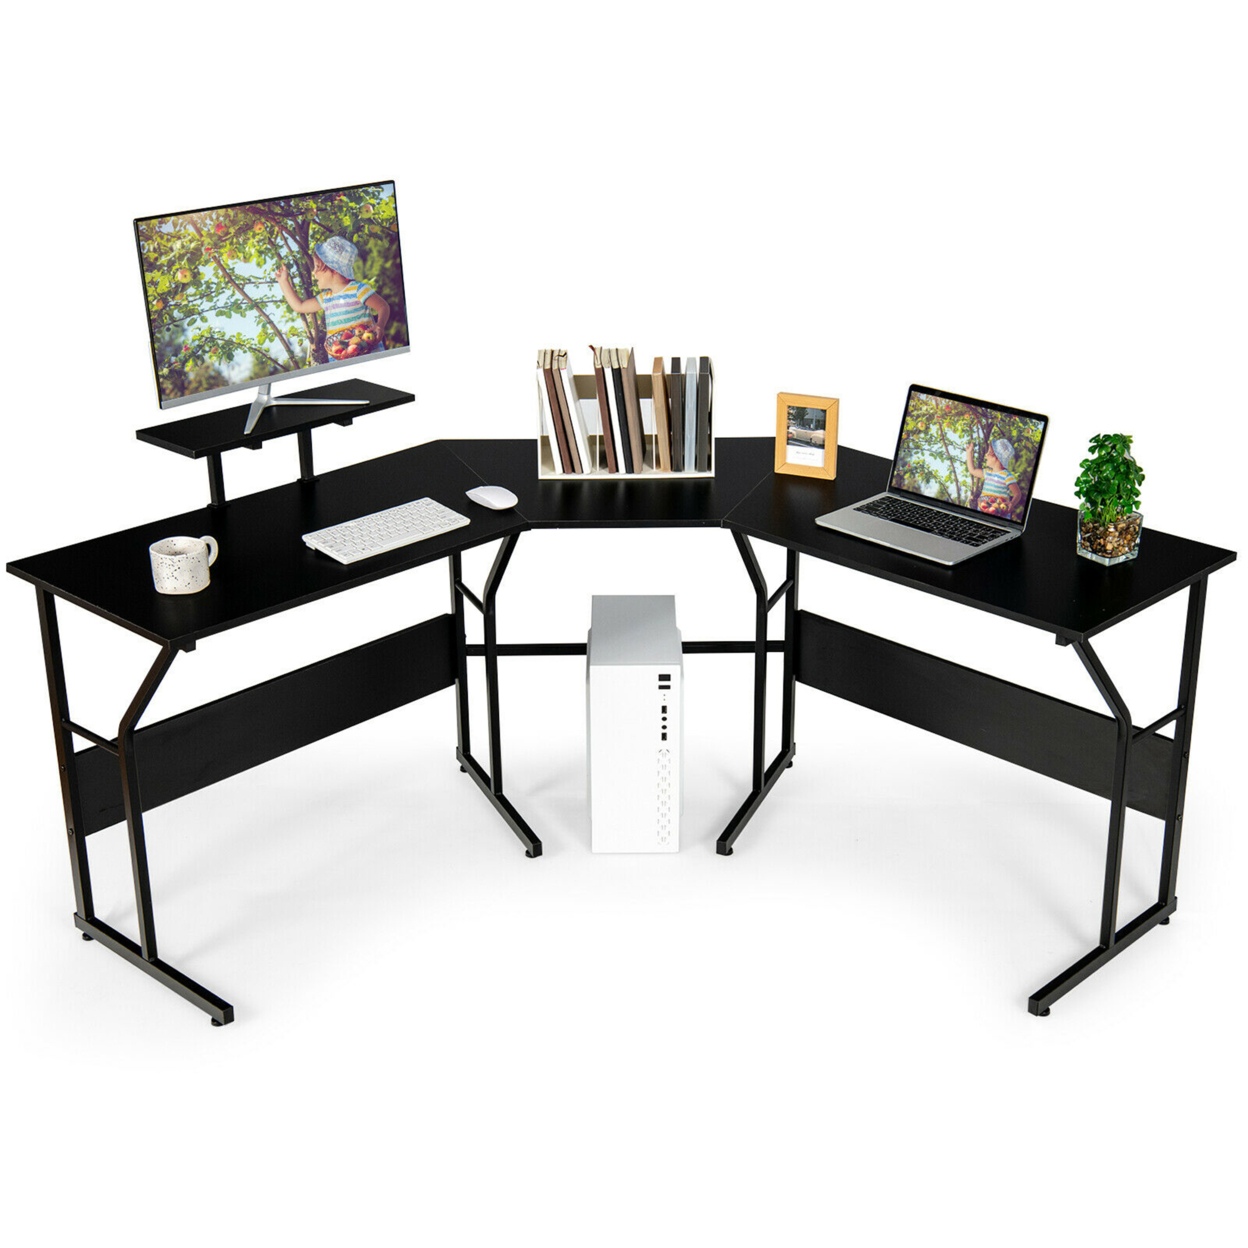 88.5'' L Shaped Reversible Computer Desk 2 Person Long Table Monitor Stand - Black